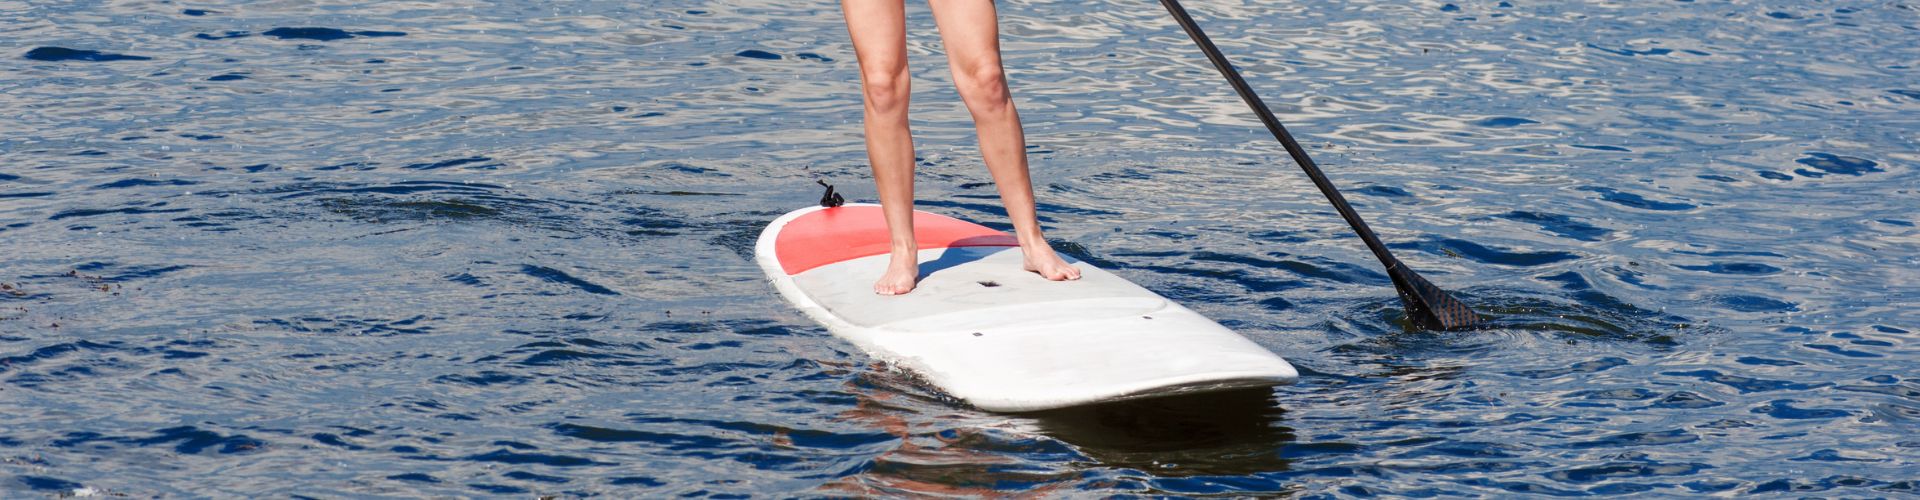 best inflatable paddle board for beginners